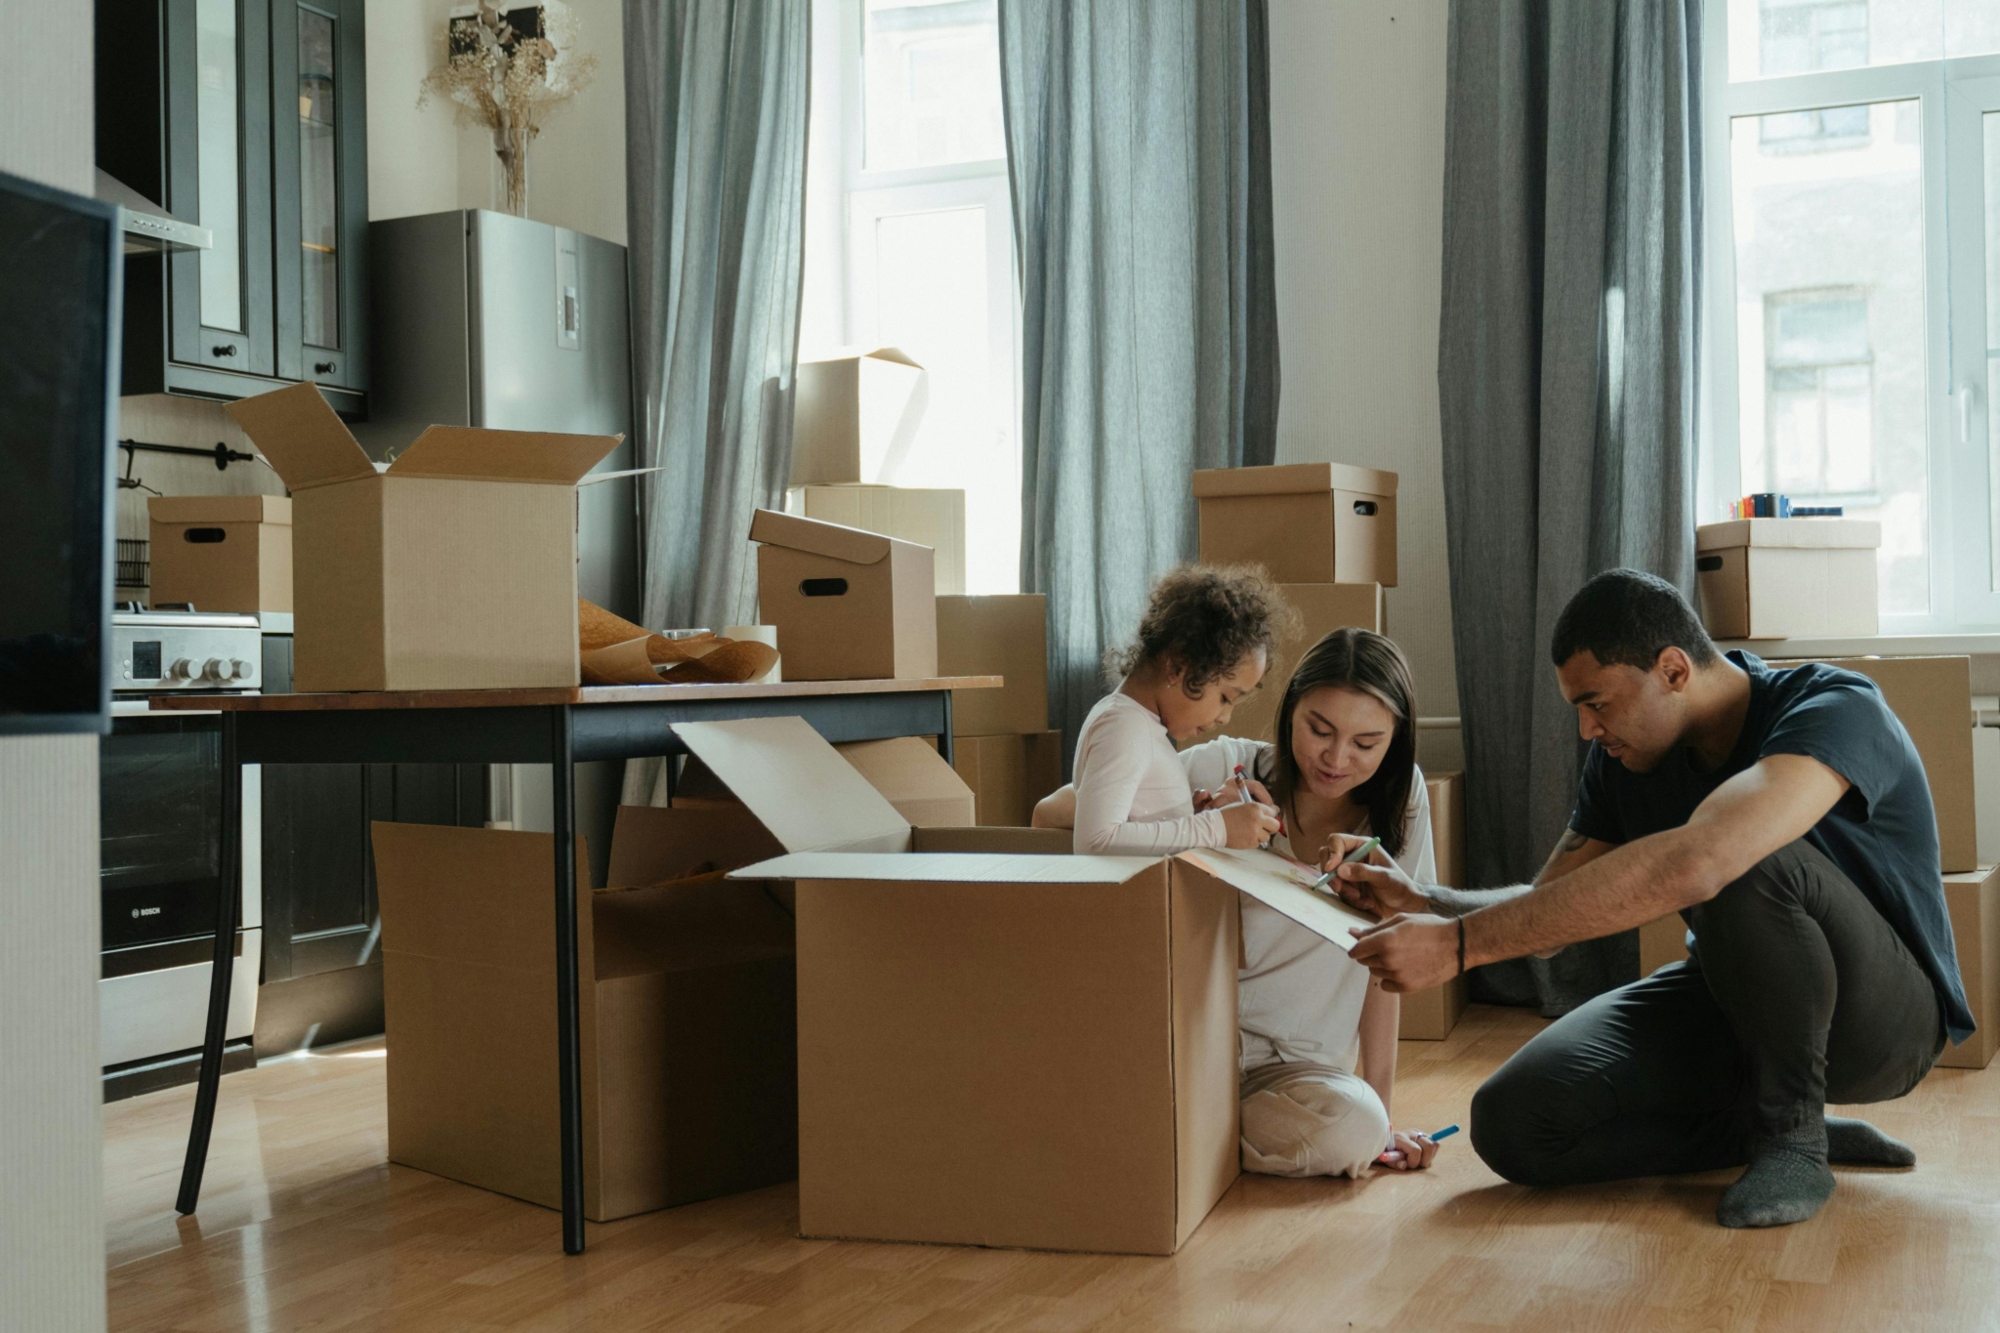 family unpacking boxes in new home